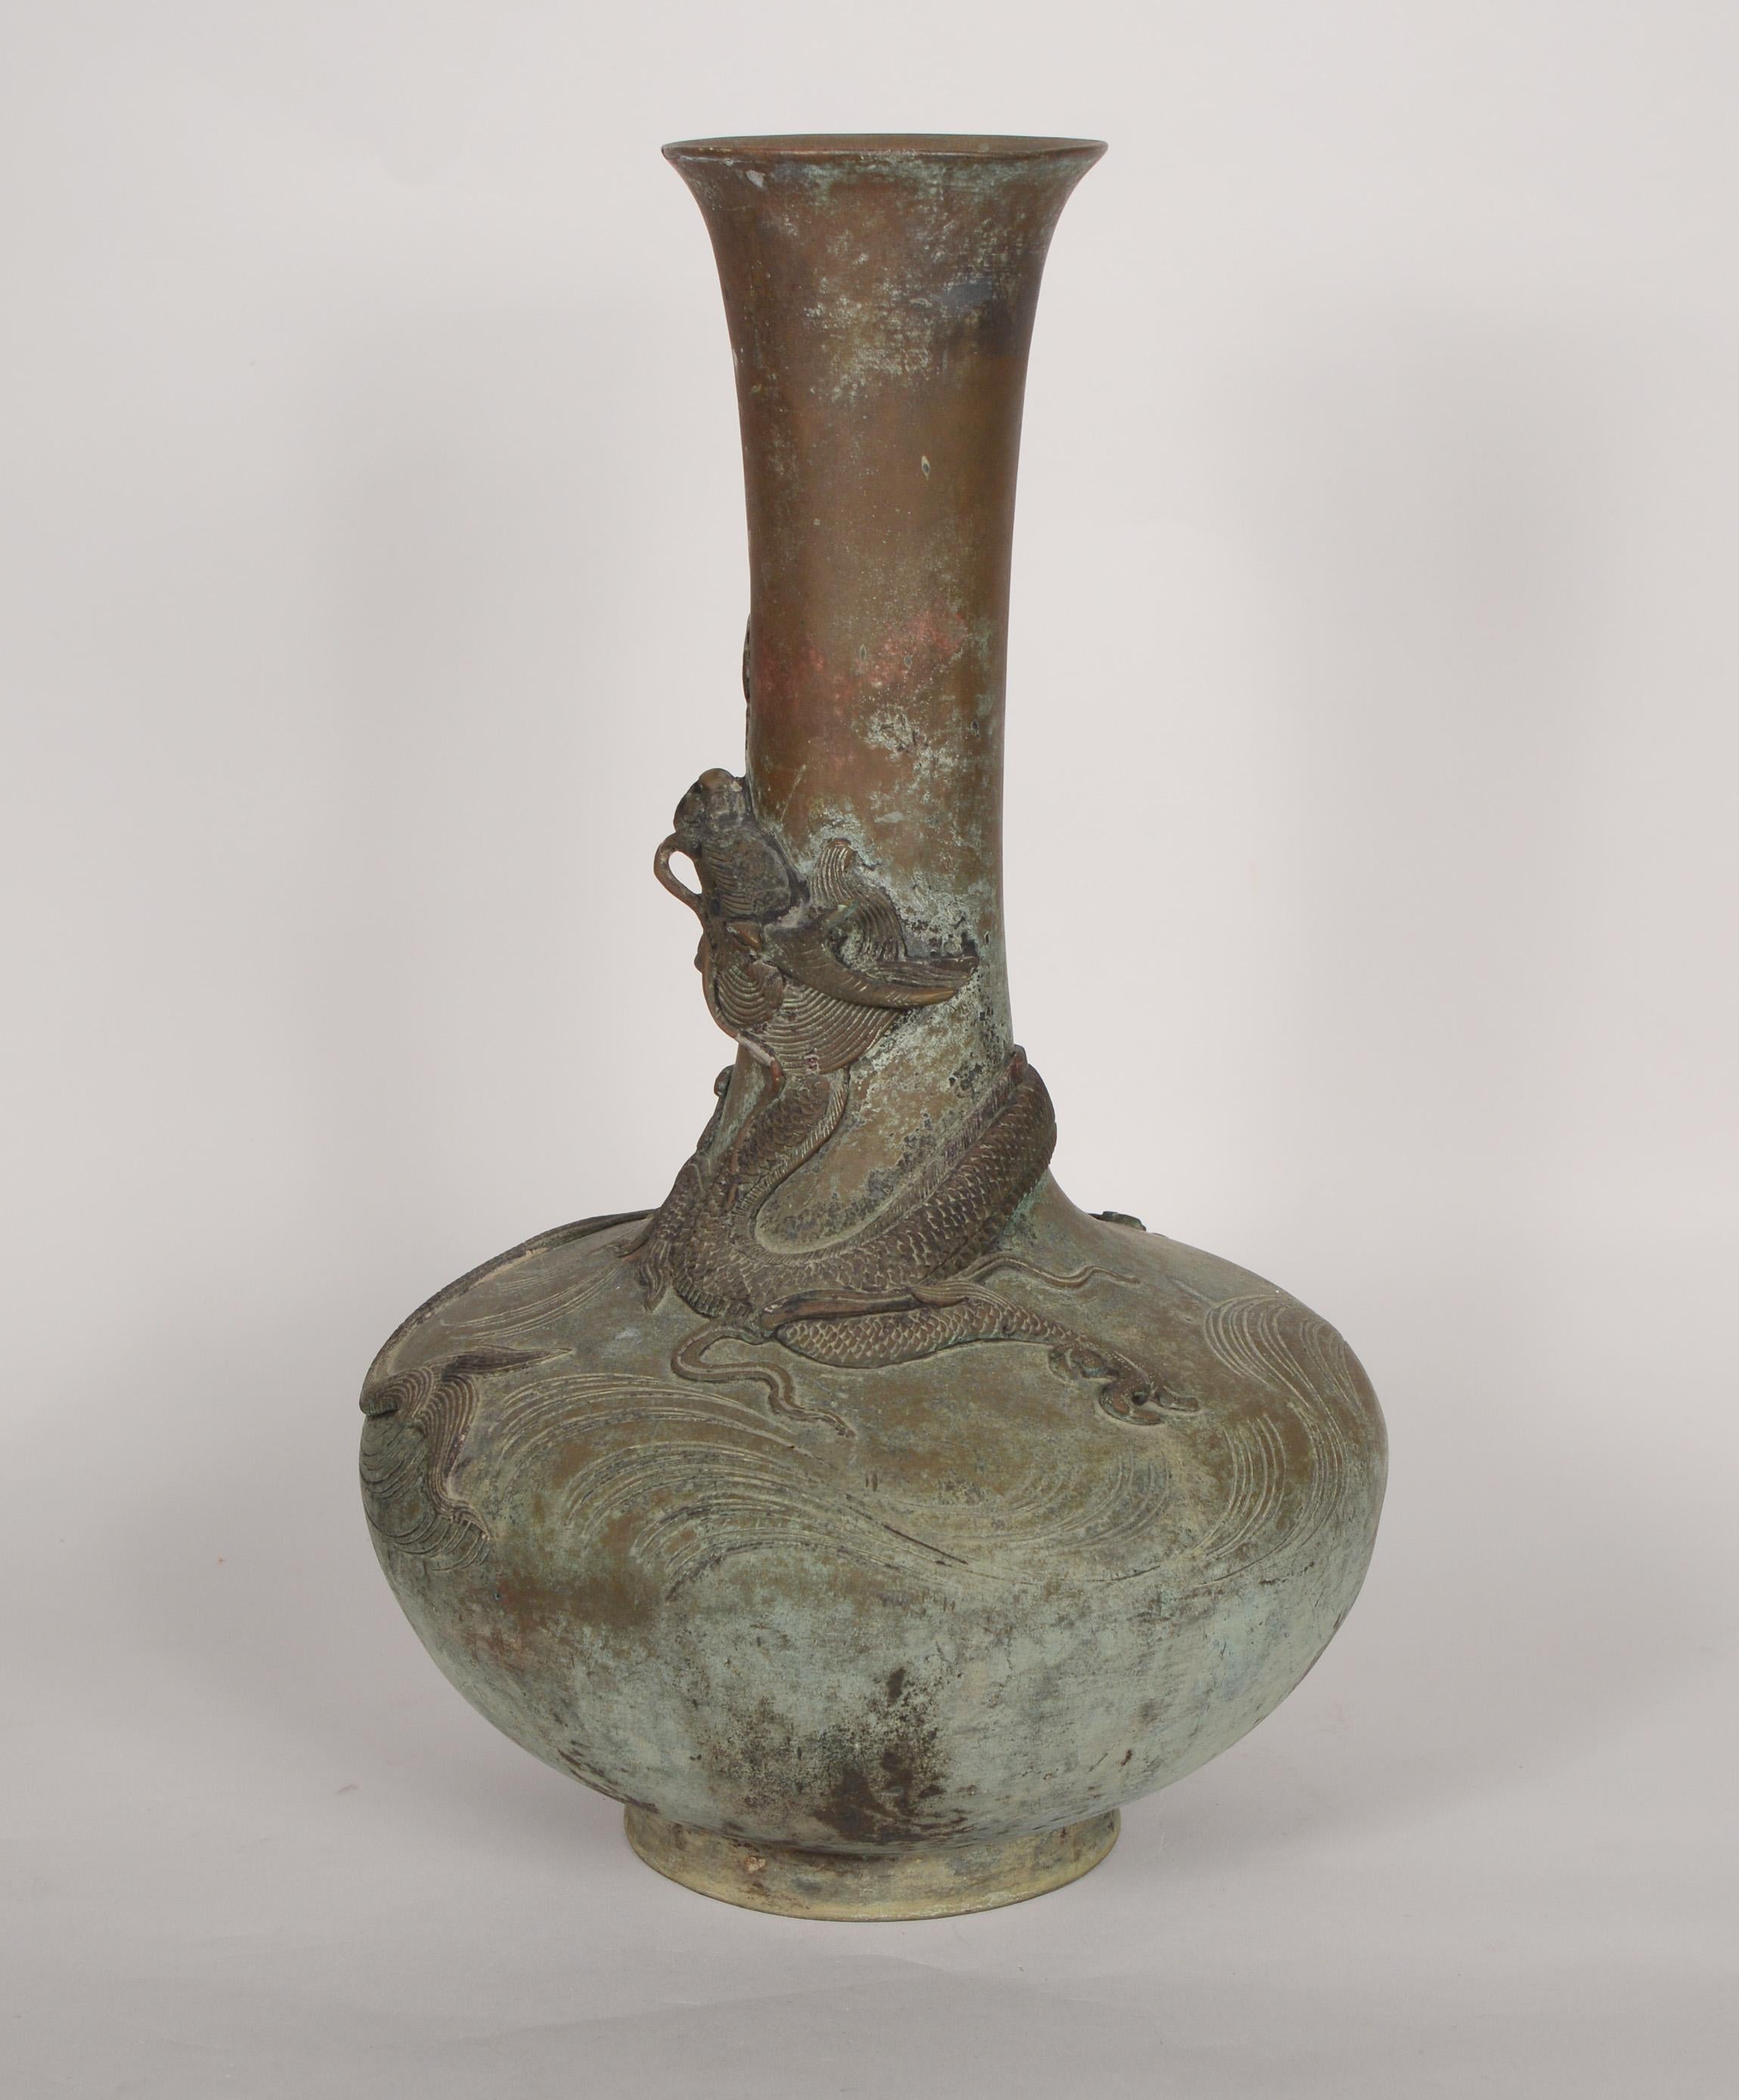 Chinese bronze vase with an applied patina. This tall vase has a dragon wrapped around the outside.